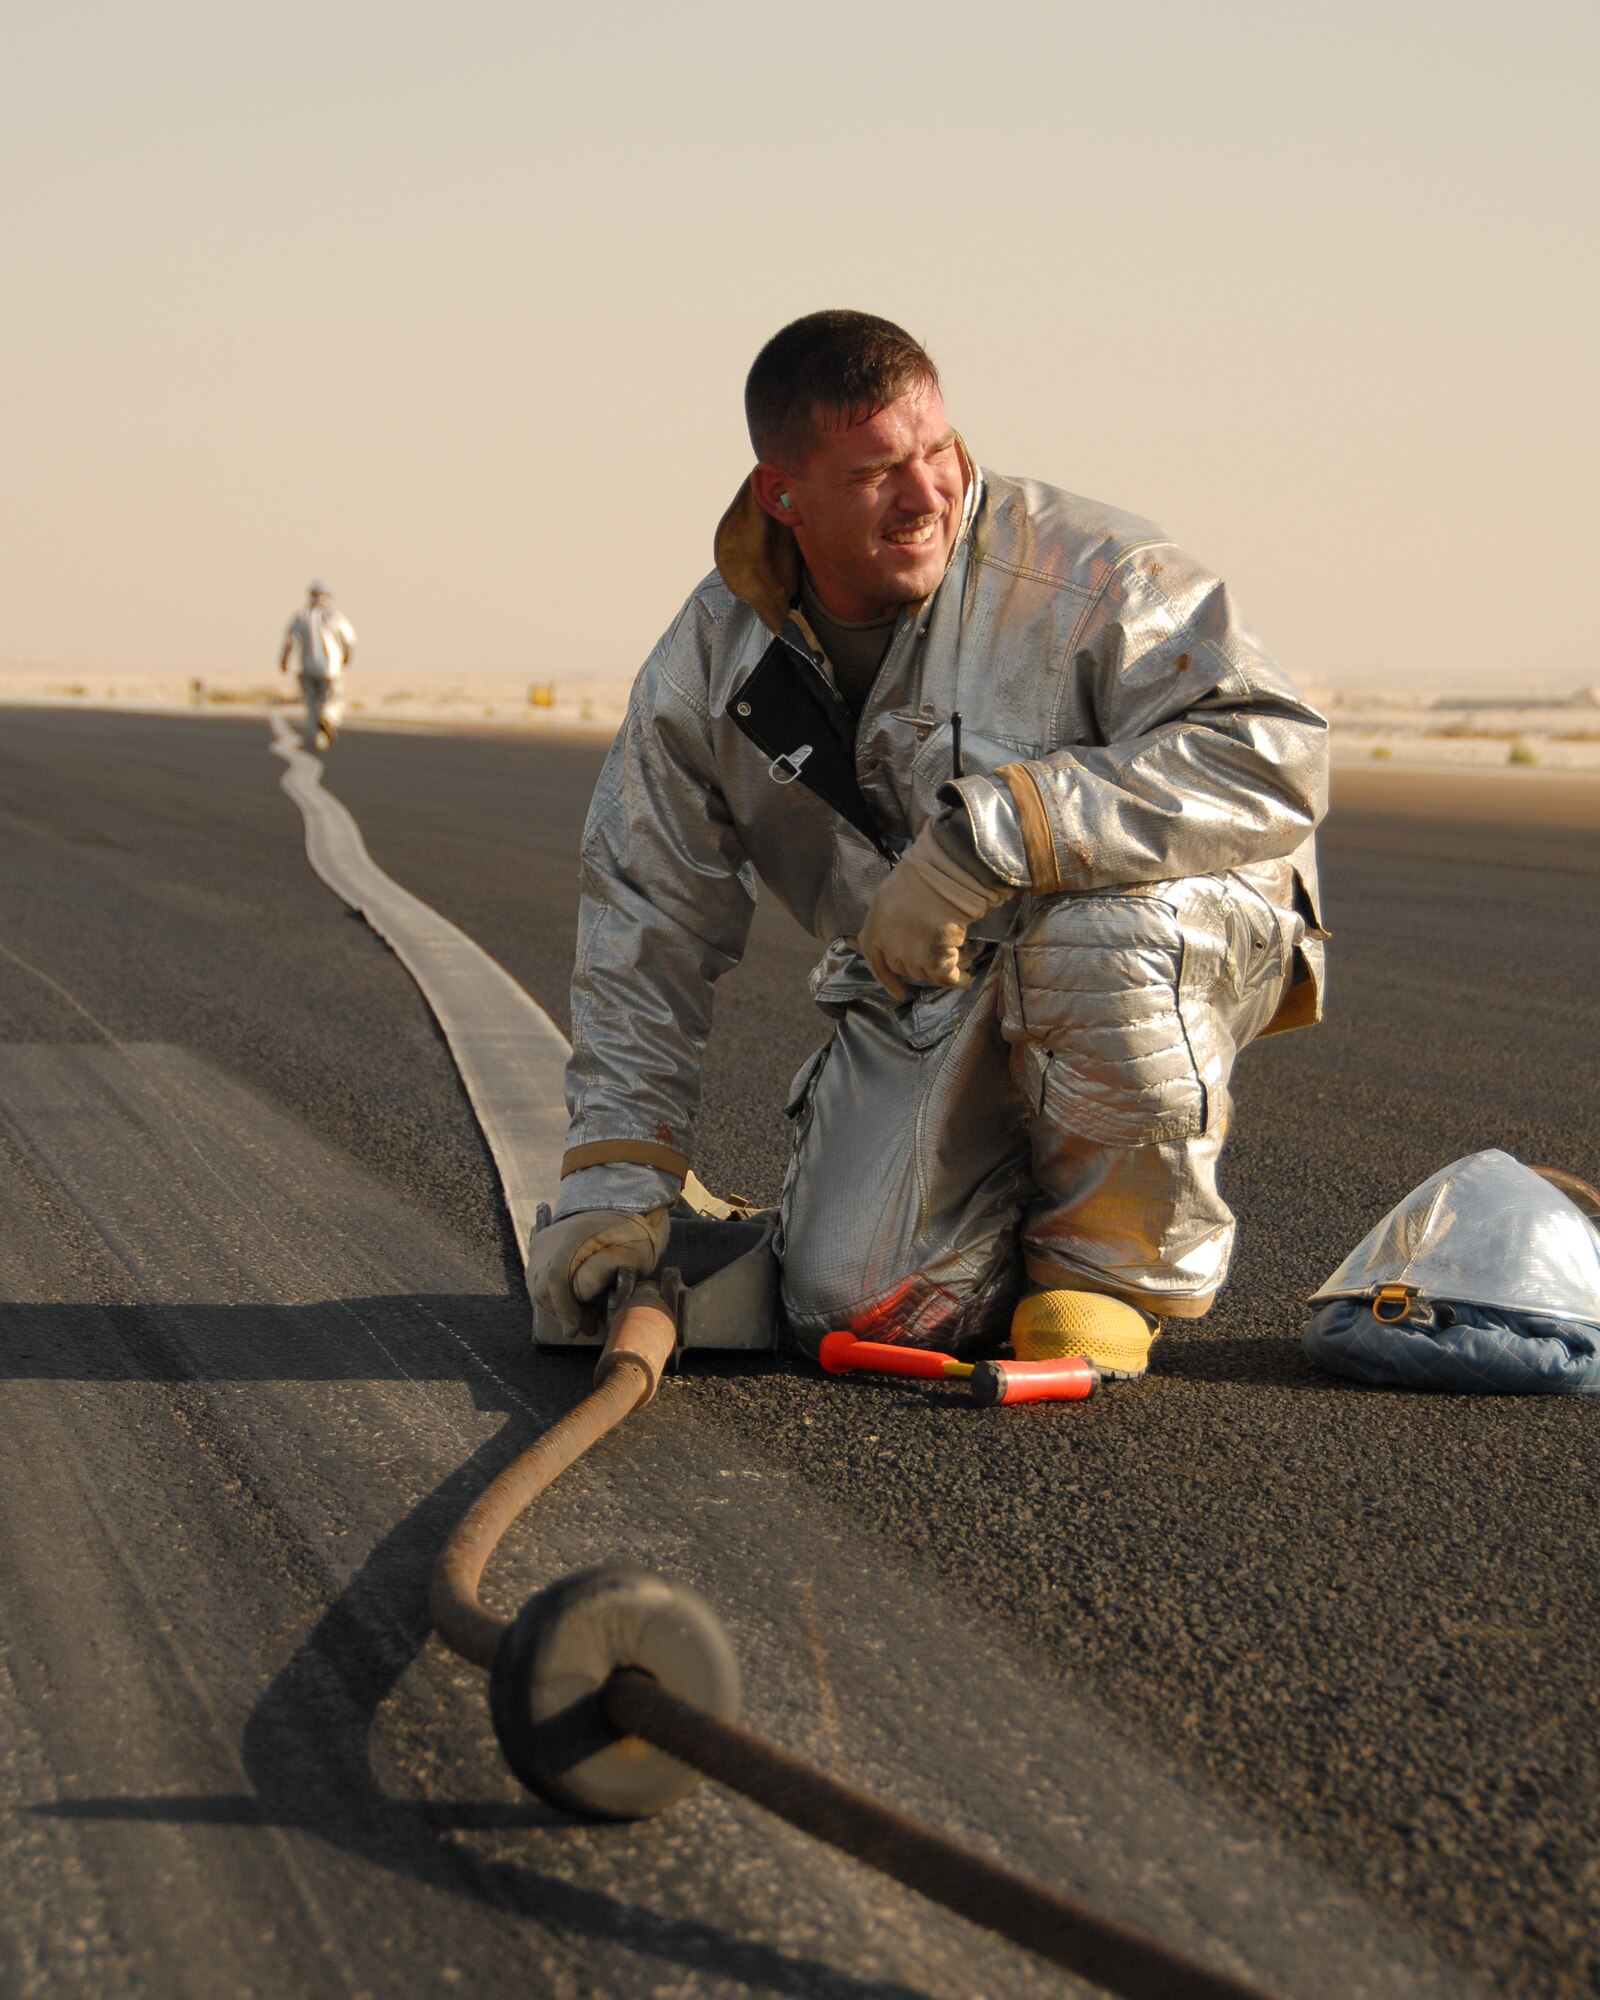 SOUTHWEST ASIA -- The 380th Expeditionary Civil Engineer Squadron's Tech. Sgt. Joshua Ashton, fire and emergency services station chief and rescue crew chief, removes the pin holding the pendant and the barrier tape together on the runway here Nov. 19. The pendant and barrier tape comprise the cable and straps used to catch the hook of a fighter jet landing or departing under emergency conditions. Sergeant Ashton, deployed from Andrews Air Force Base, Md., assisted in a cable engagement certification with the help of visiting F-15s from Eglin AFB, Fla. Sergeant Ashton is from Grove City, Ohio. (U.S. Air Force photo by Tech. Sgt. Denise Johnson) (released)